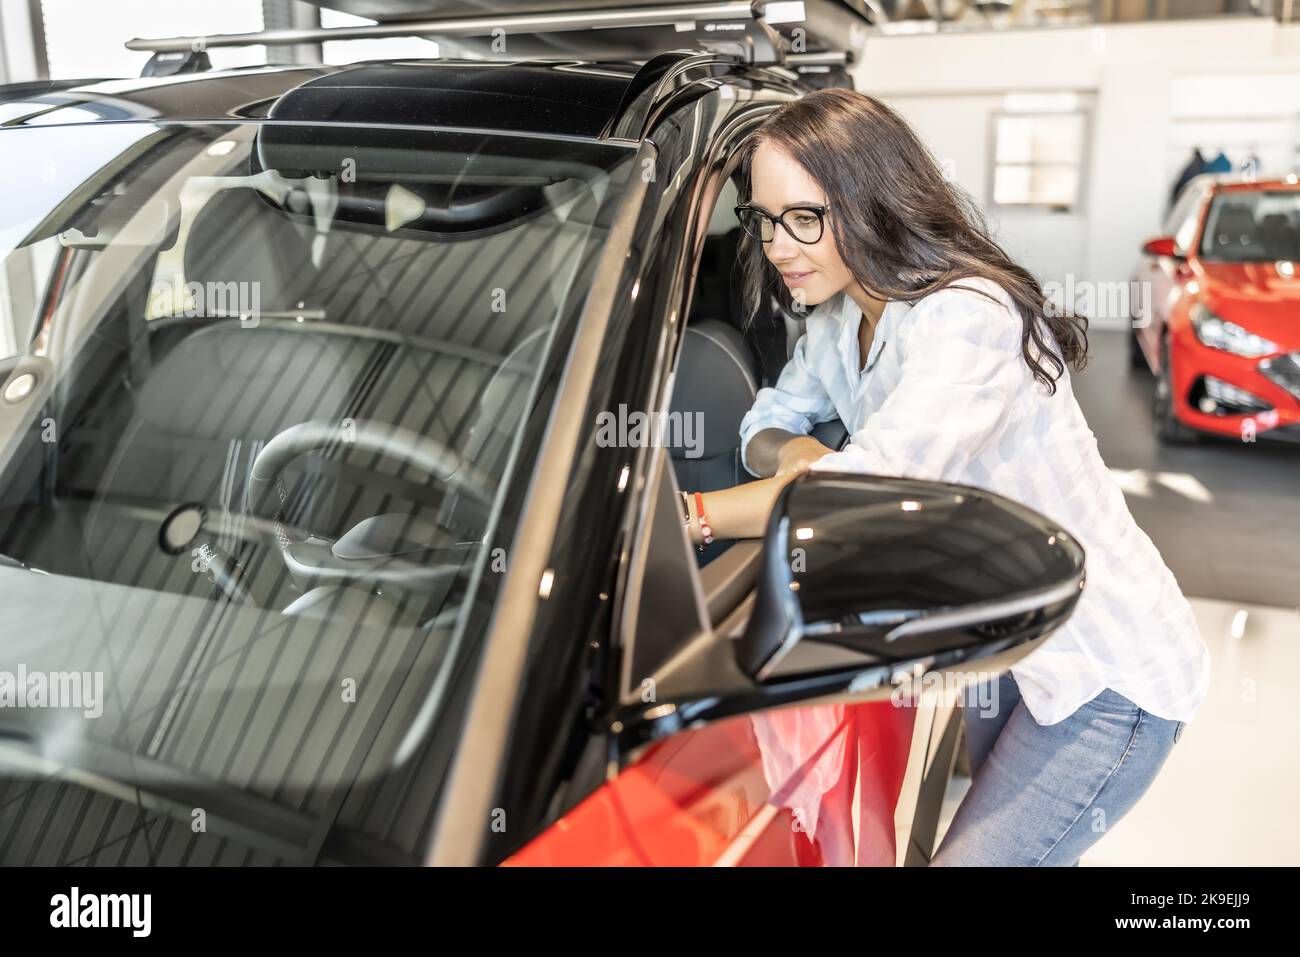 A young customer takes advantage of the inspection of a new car in the store. Stock Photo